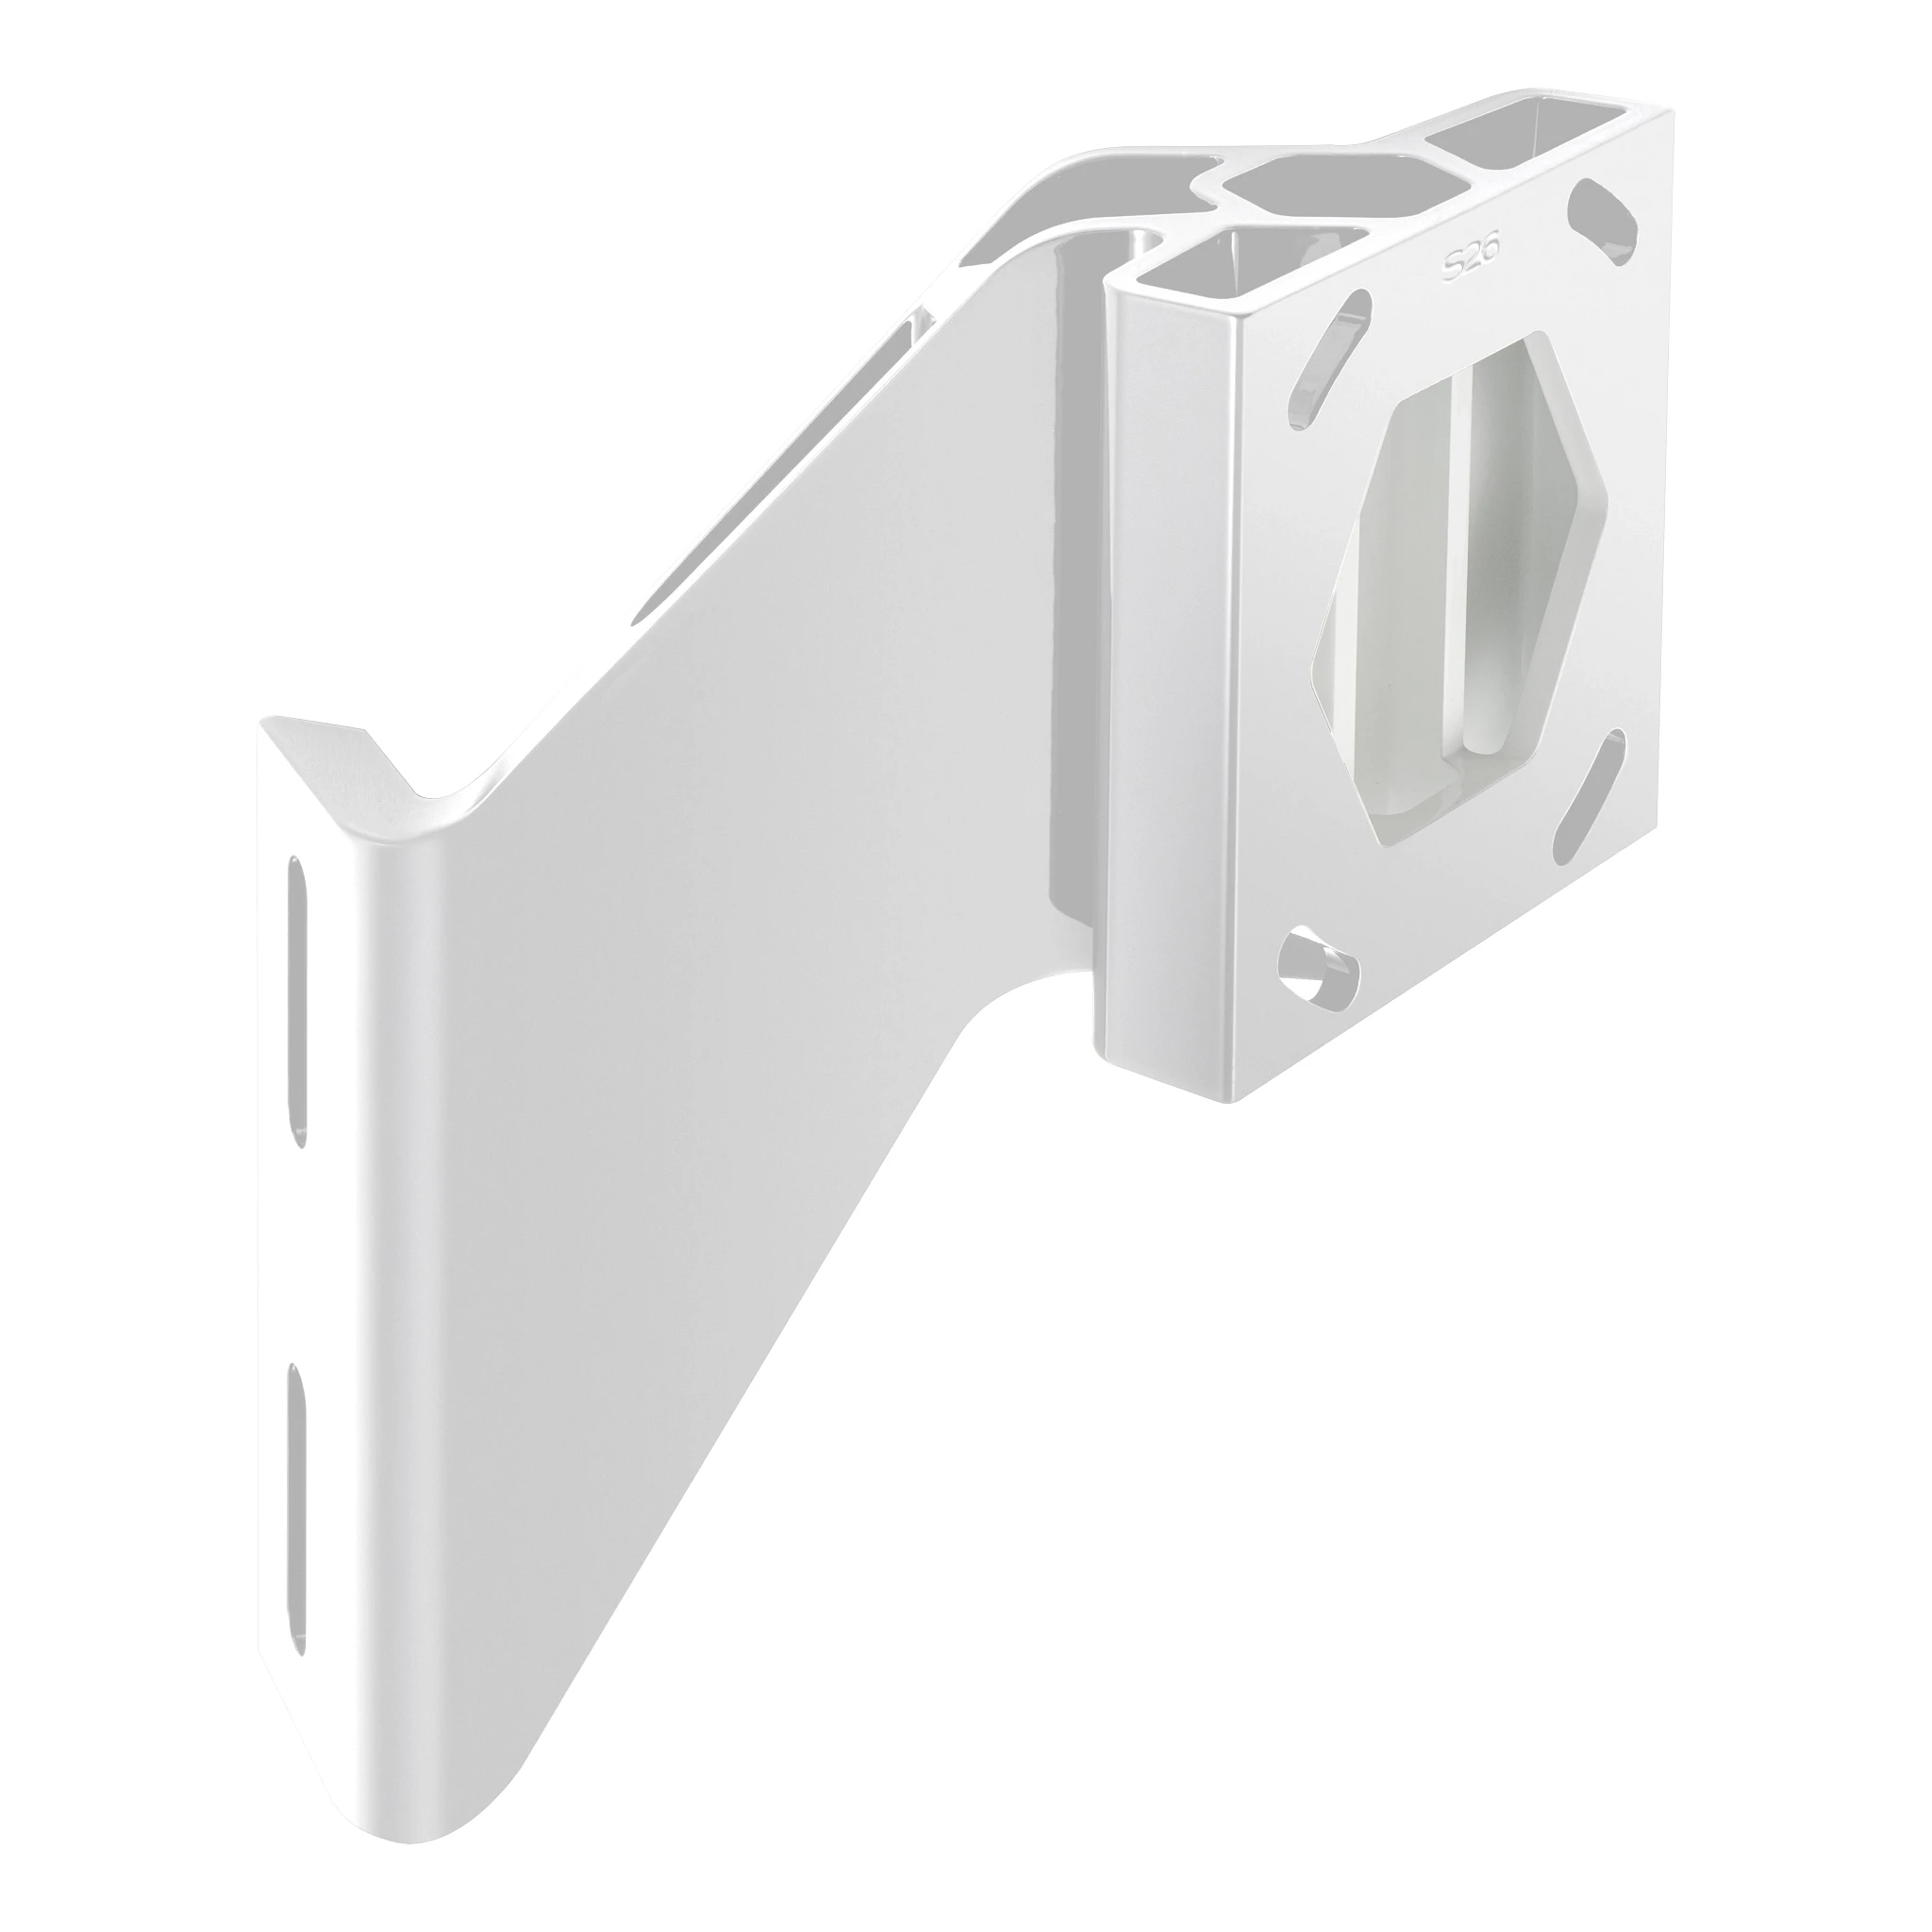 Angled view of white, 6" starboard jack plate for Raptor shallow water anchor